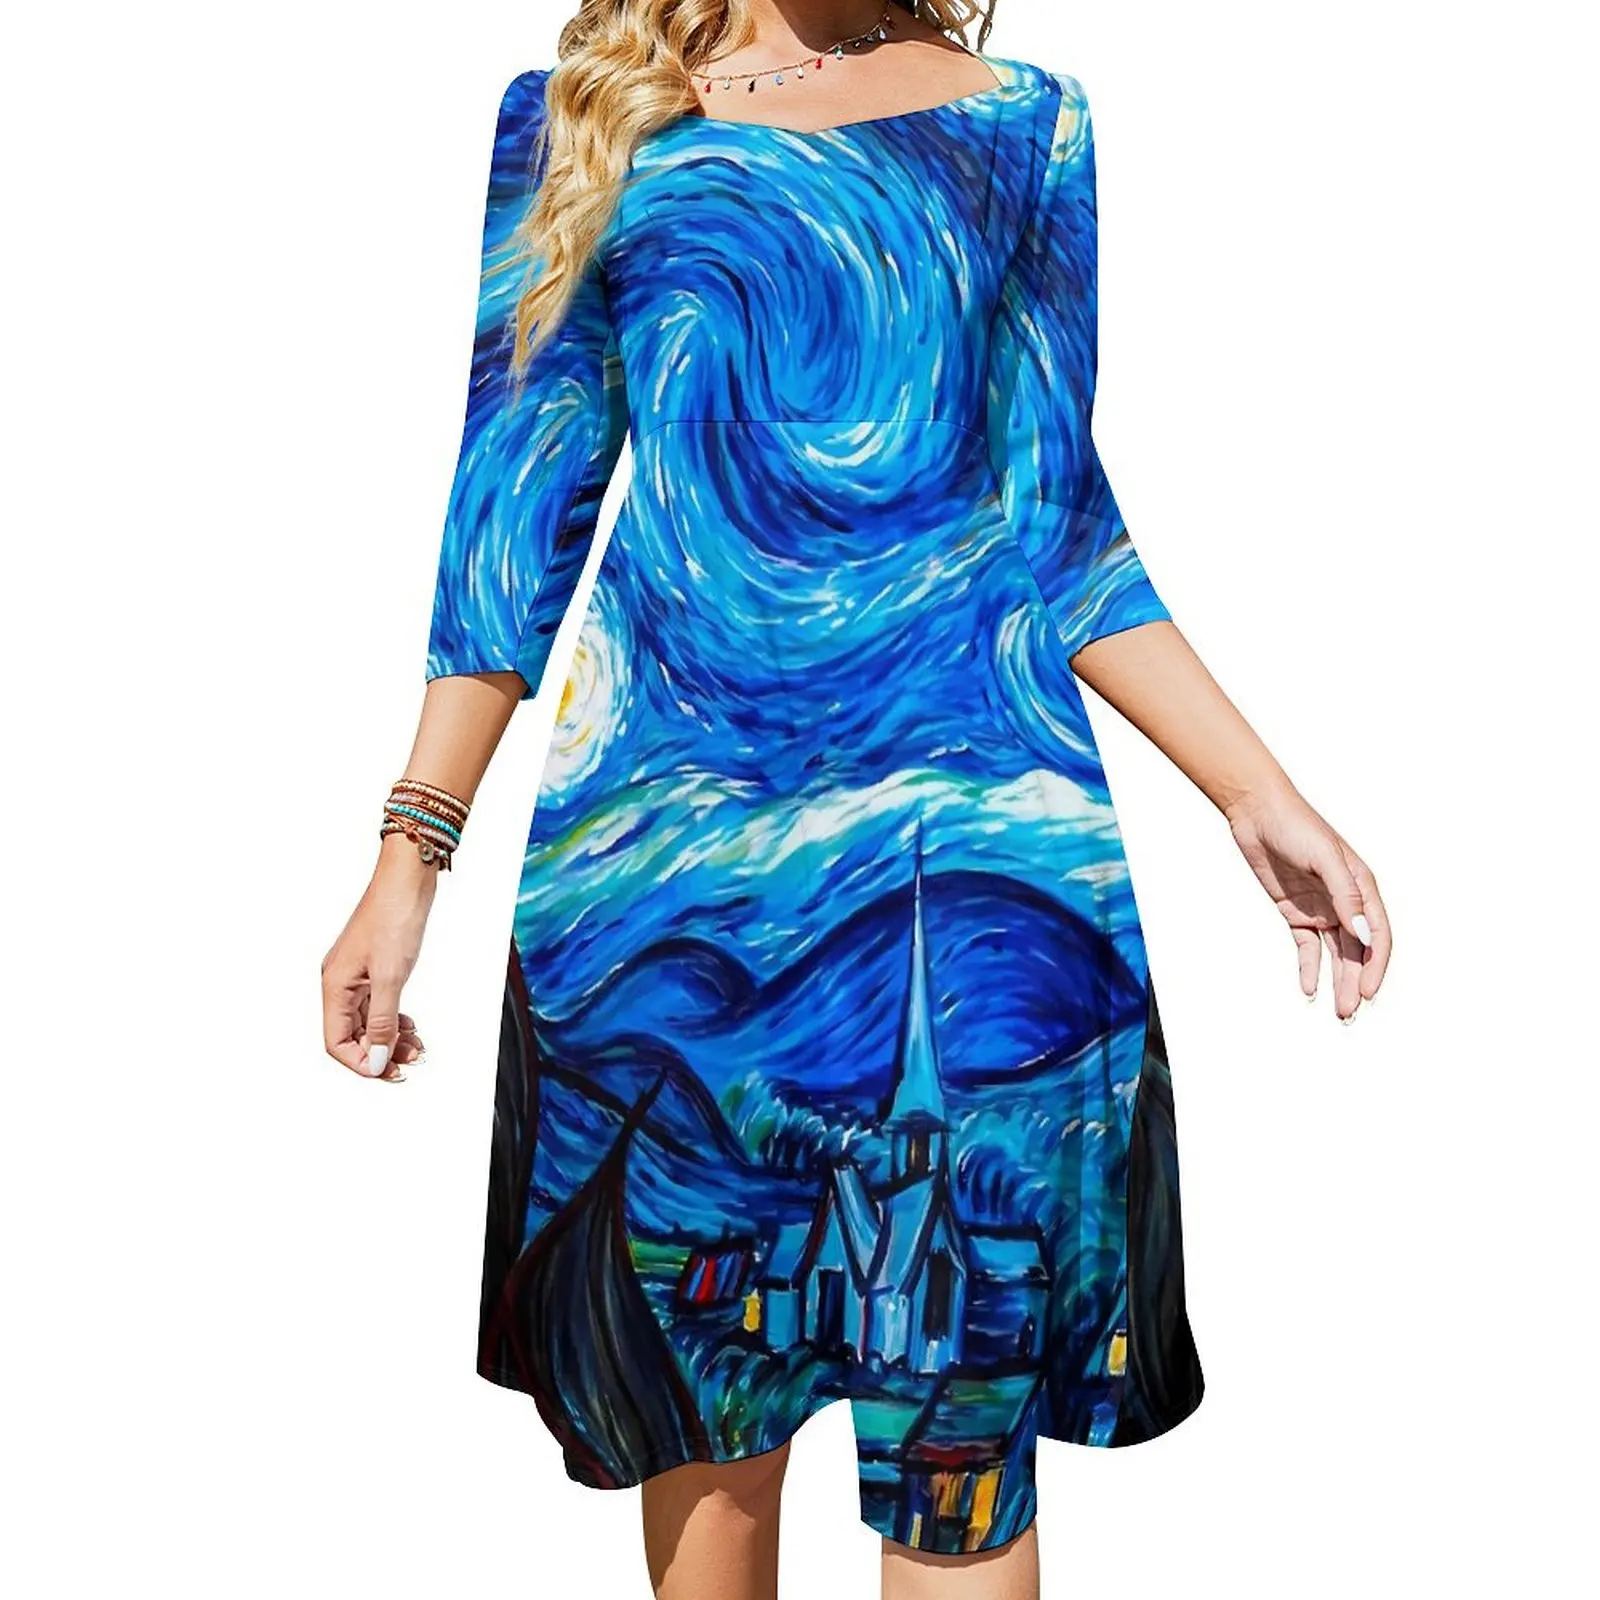 

Classic Starry Night Dress Summer Sexy Vincent Van Gogh Festival Dresses Woman Street Style Big Size Casual Dress Birthday Gift